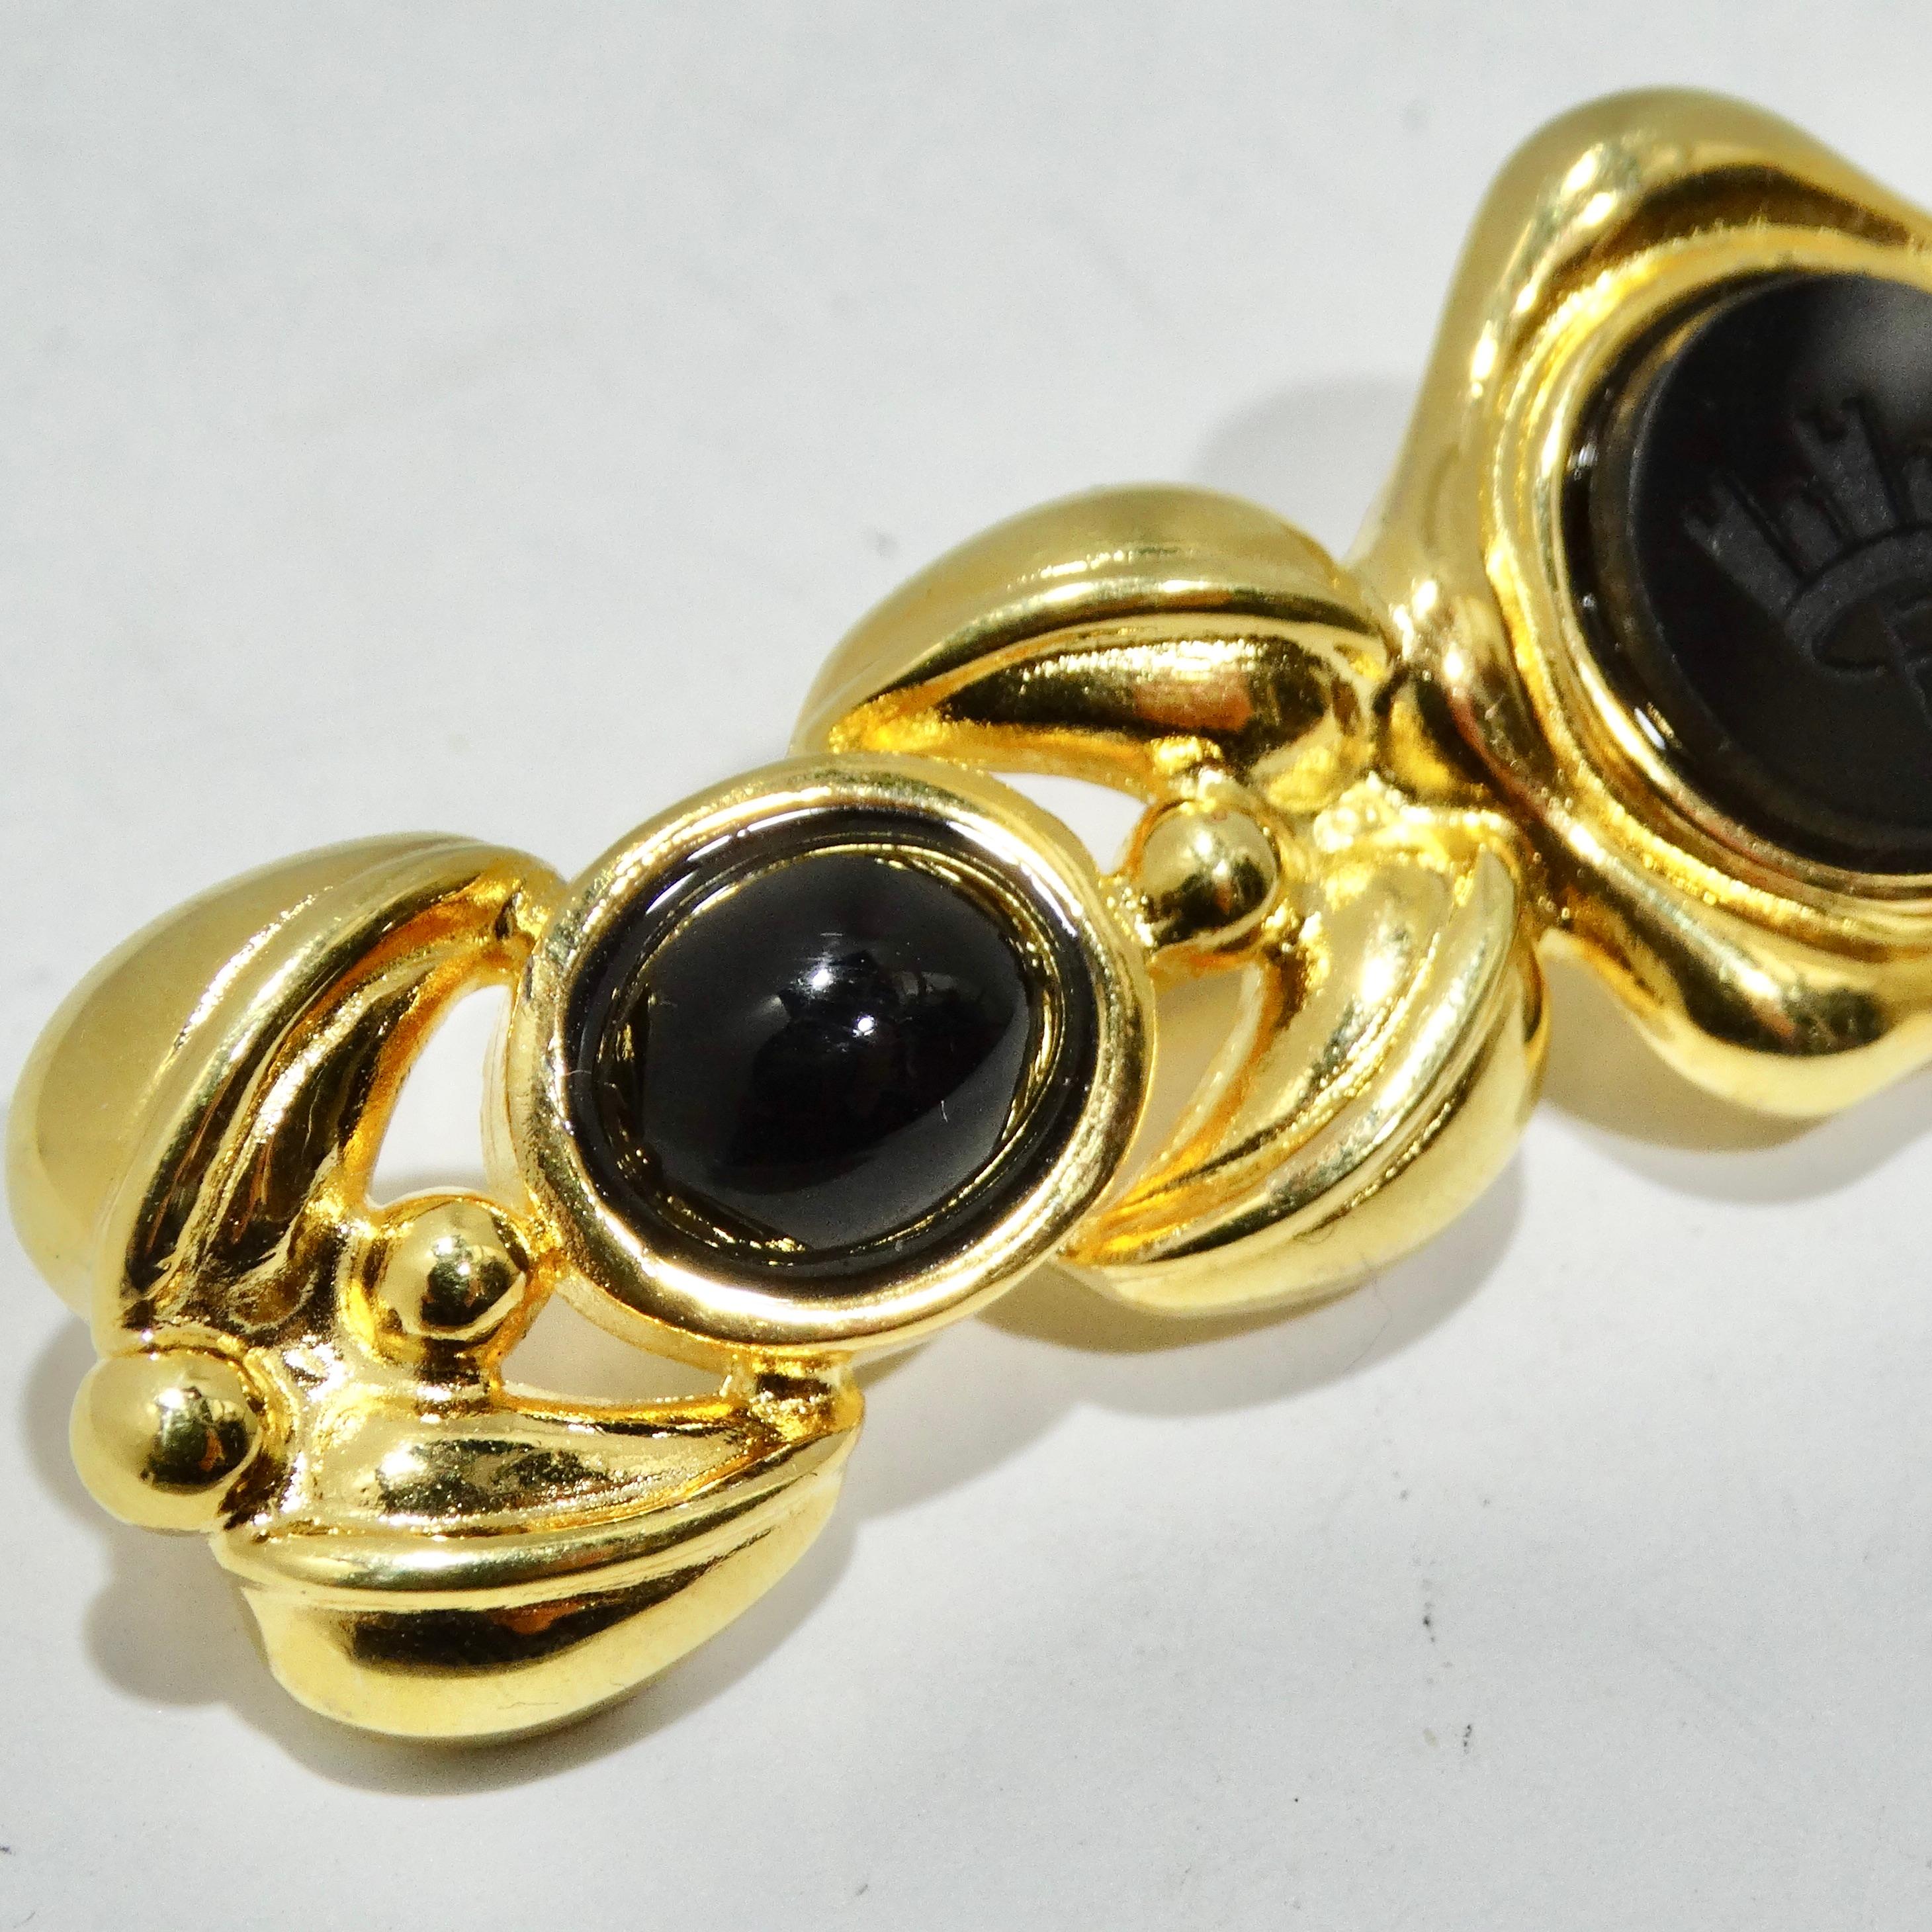 Fendi 1980s Black FF Glass Gold Tone Brooch In Excellent Condition For Sale In Scottsdale, AZ